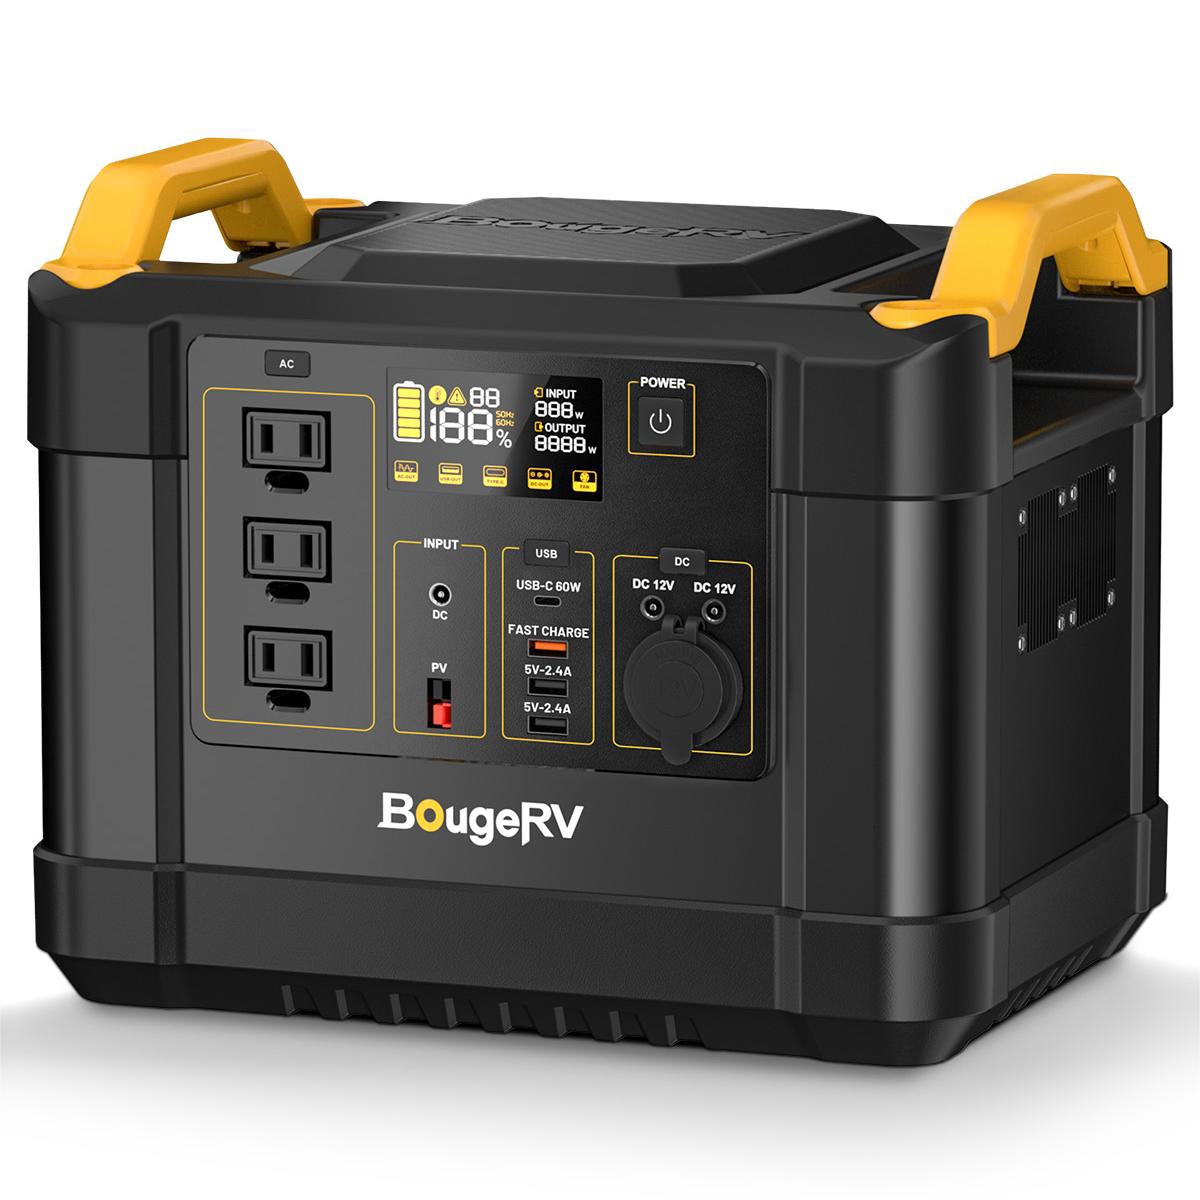 BougeRV Portable Power Station 1200-Watt Portable Power Station in